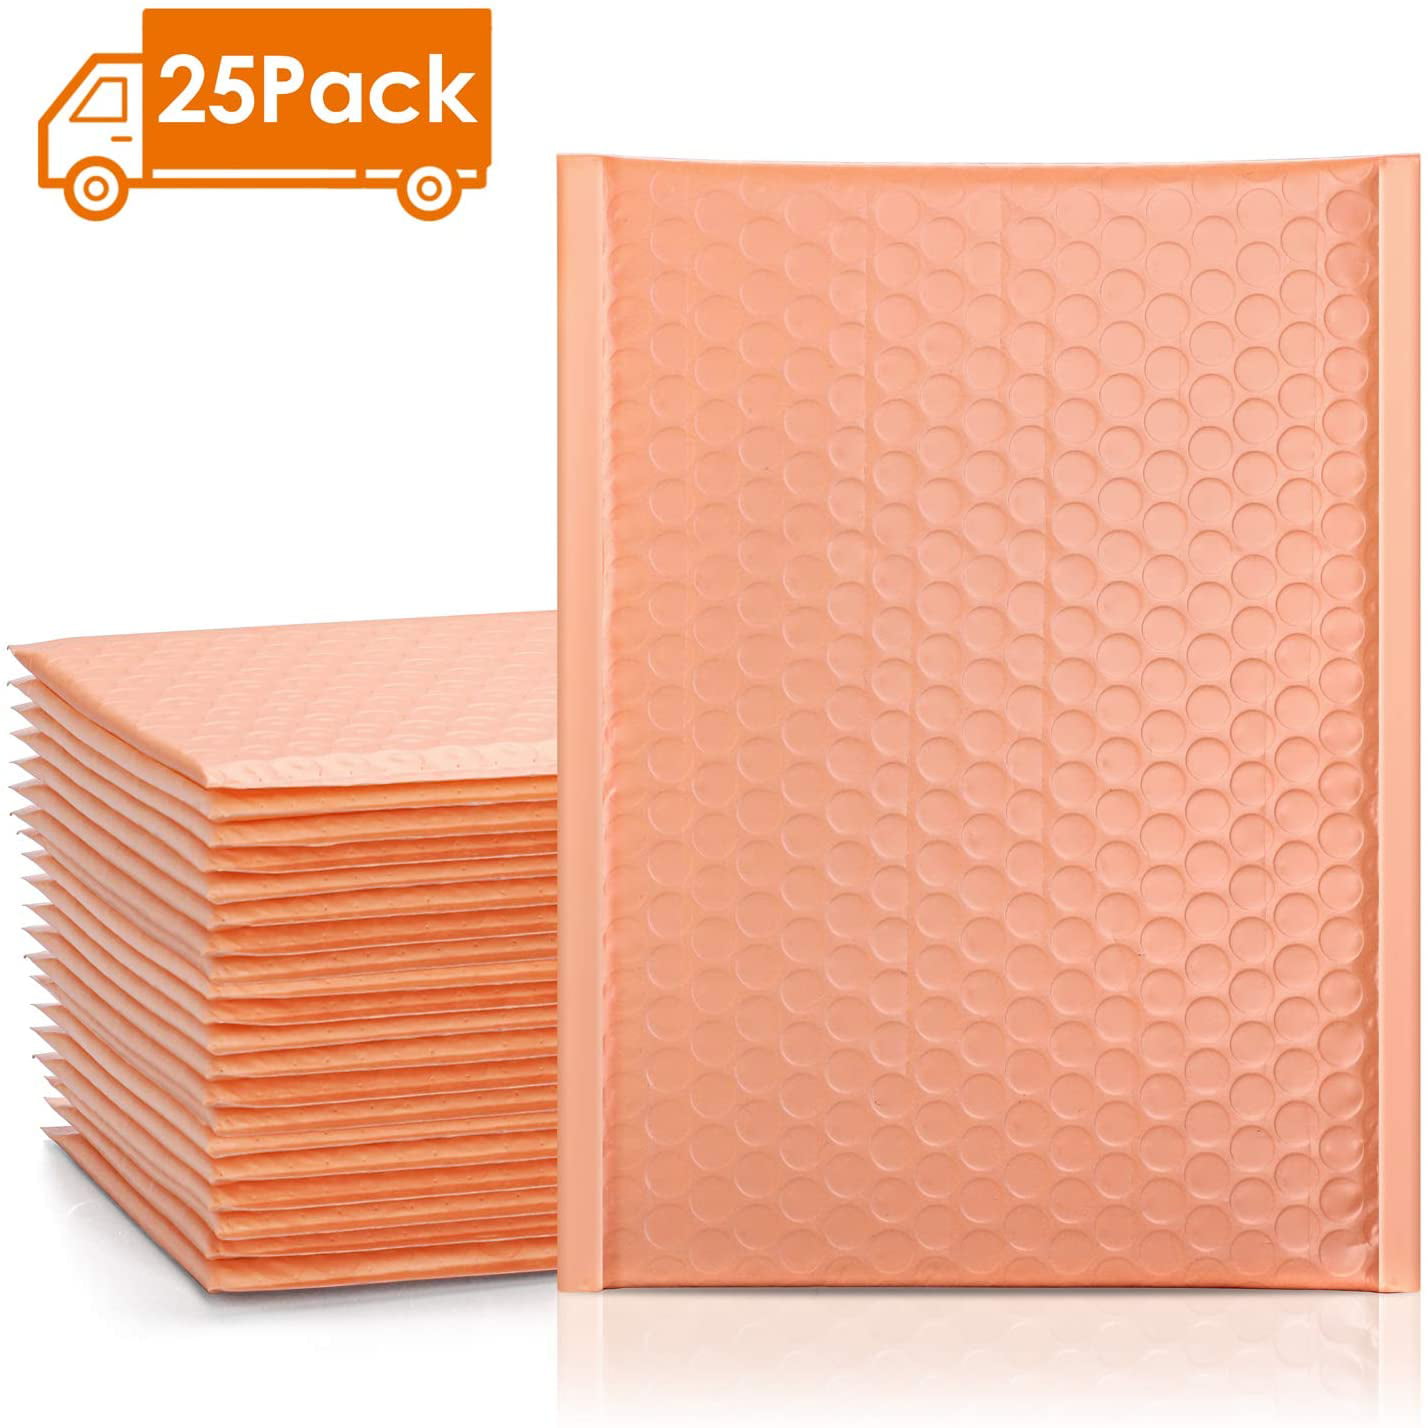 Metronic 25pcs Kraft Bubble Mailers 6x10 Inch Padded Envelopes #0 Kraft Bubble Lined Poly Mailers Self Seal in Natural 